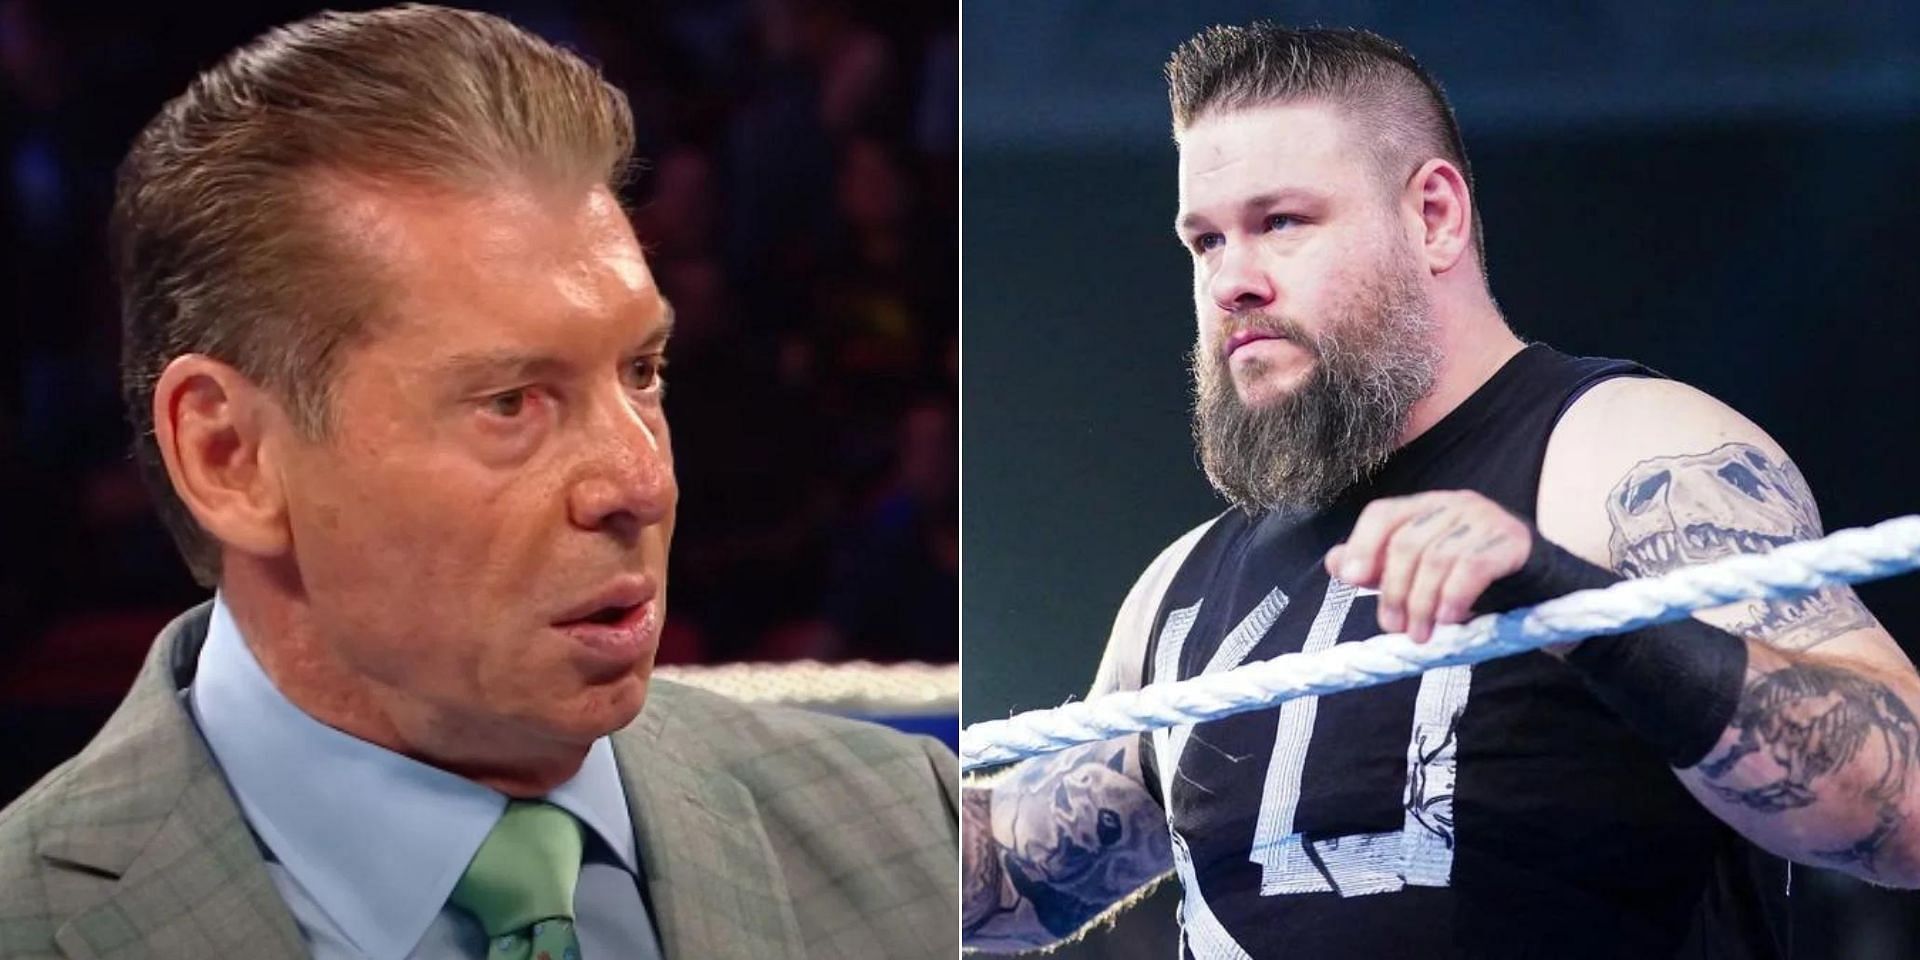 Kevin Owens re-signed with Vince McMahon